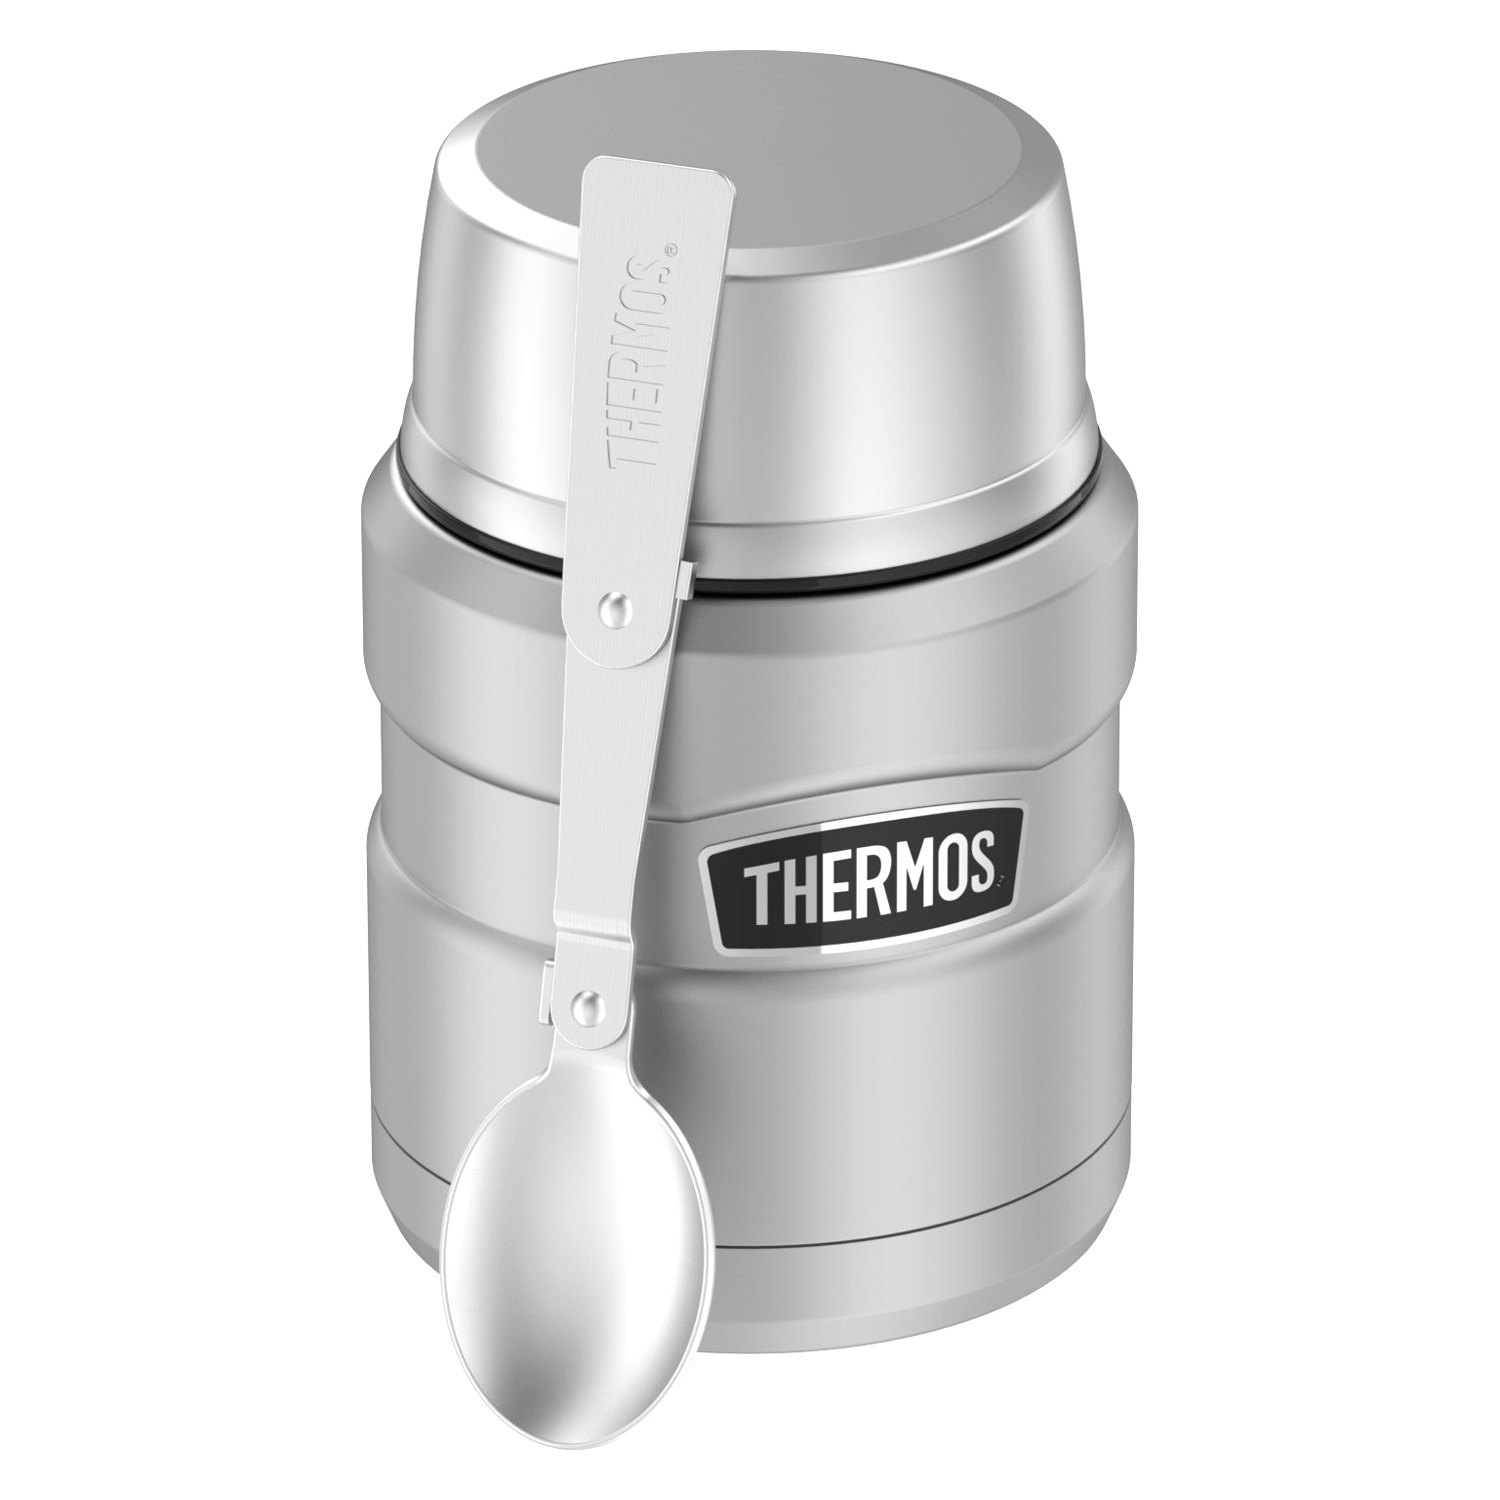 https://images.recreationid.com/thermos/items/sk3000mstri4-4.jpg